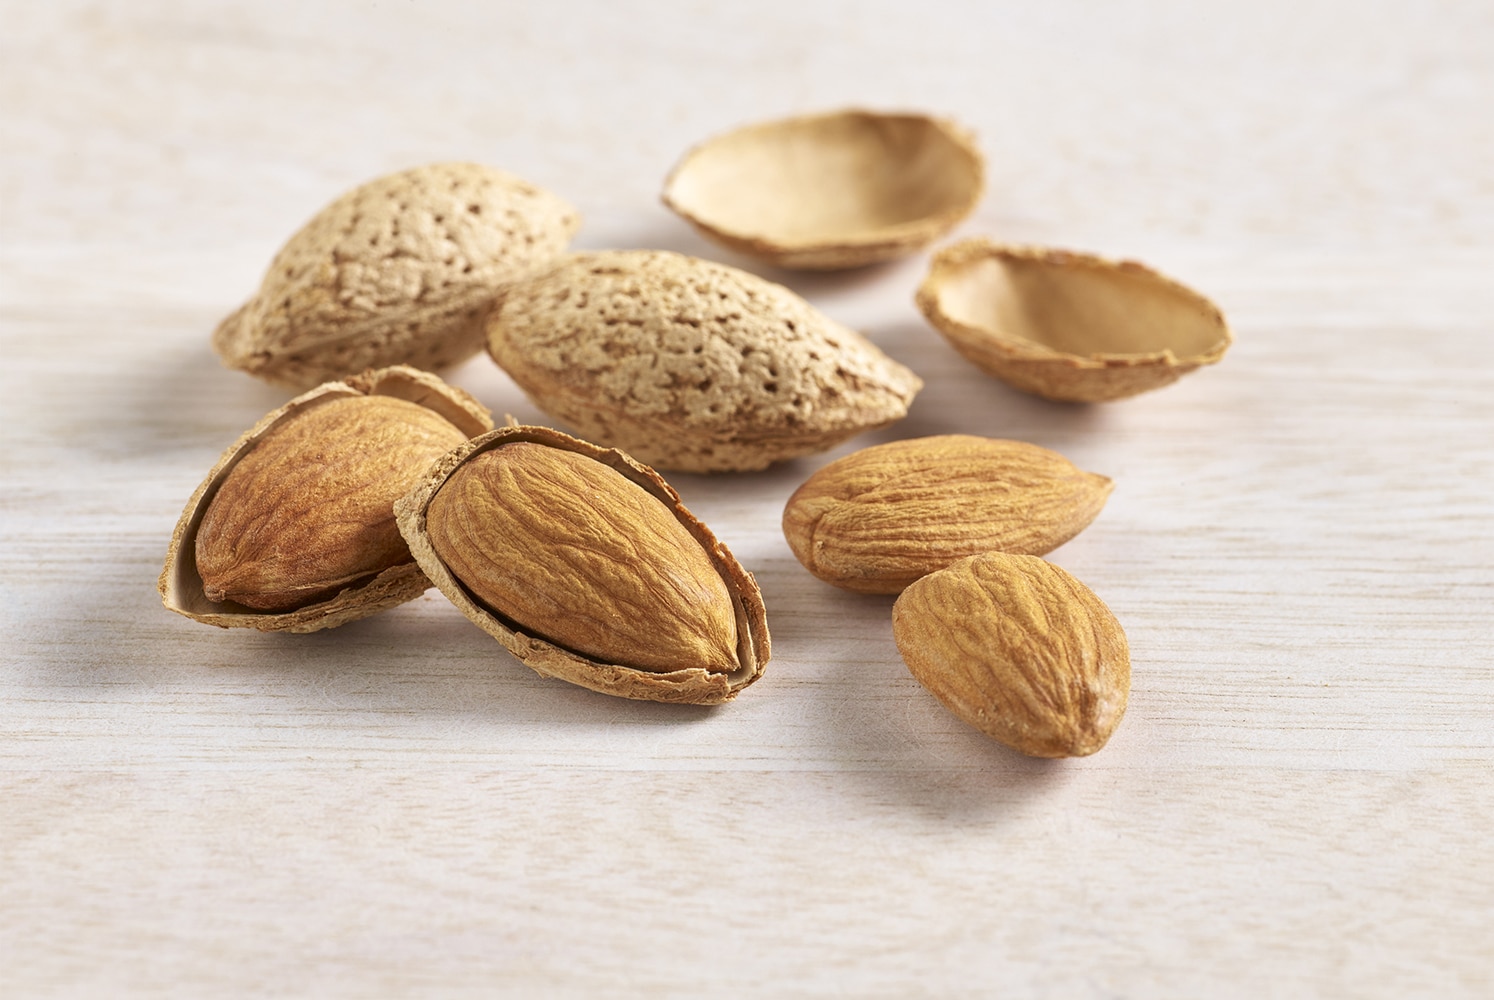 Health Benefits of Adding Almonds into Daily Fitness Regime